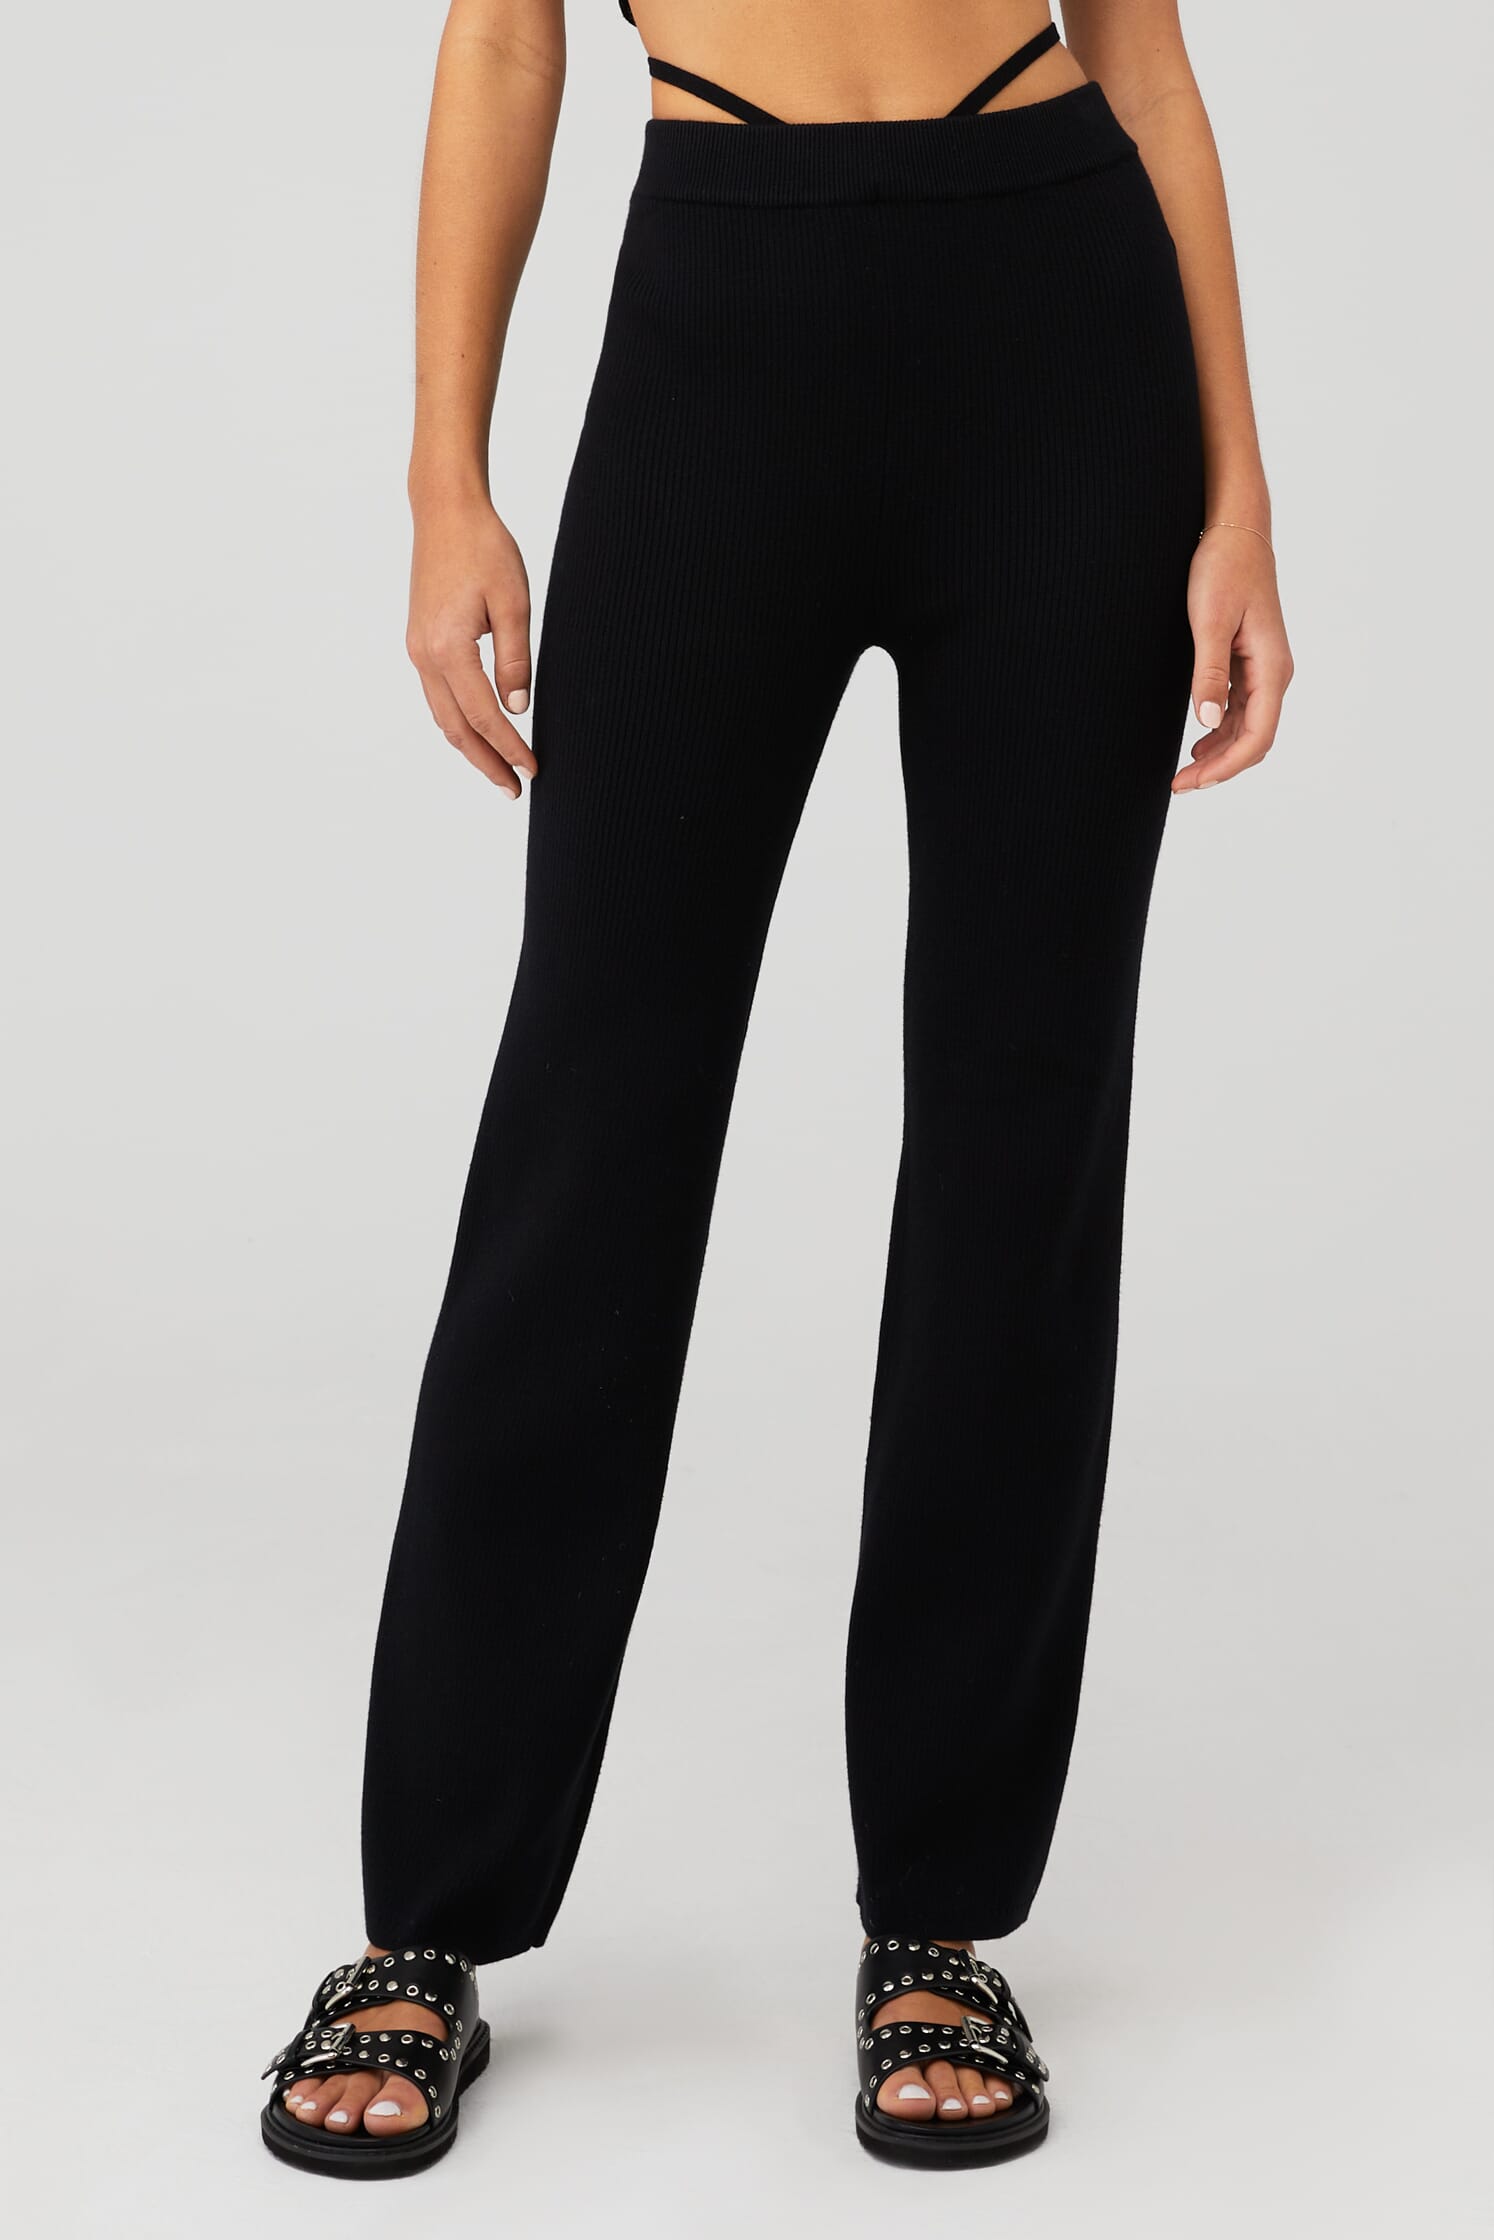 4th & Reckless ribbed high waist legging in black